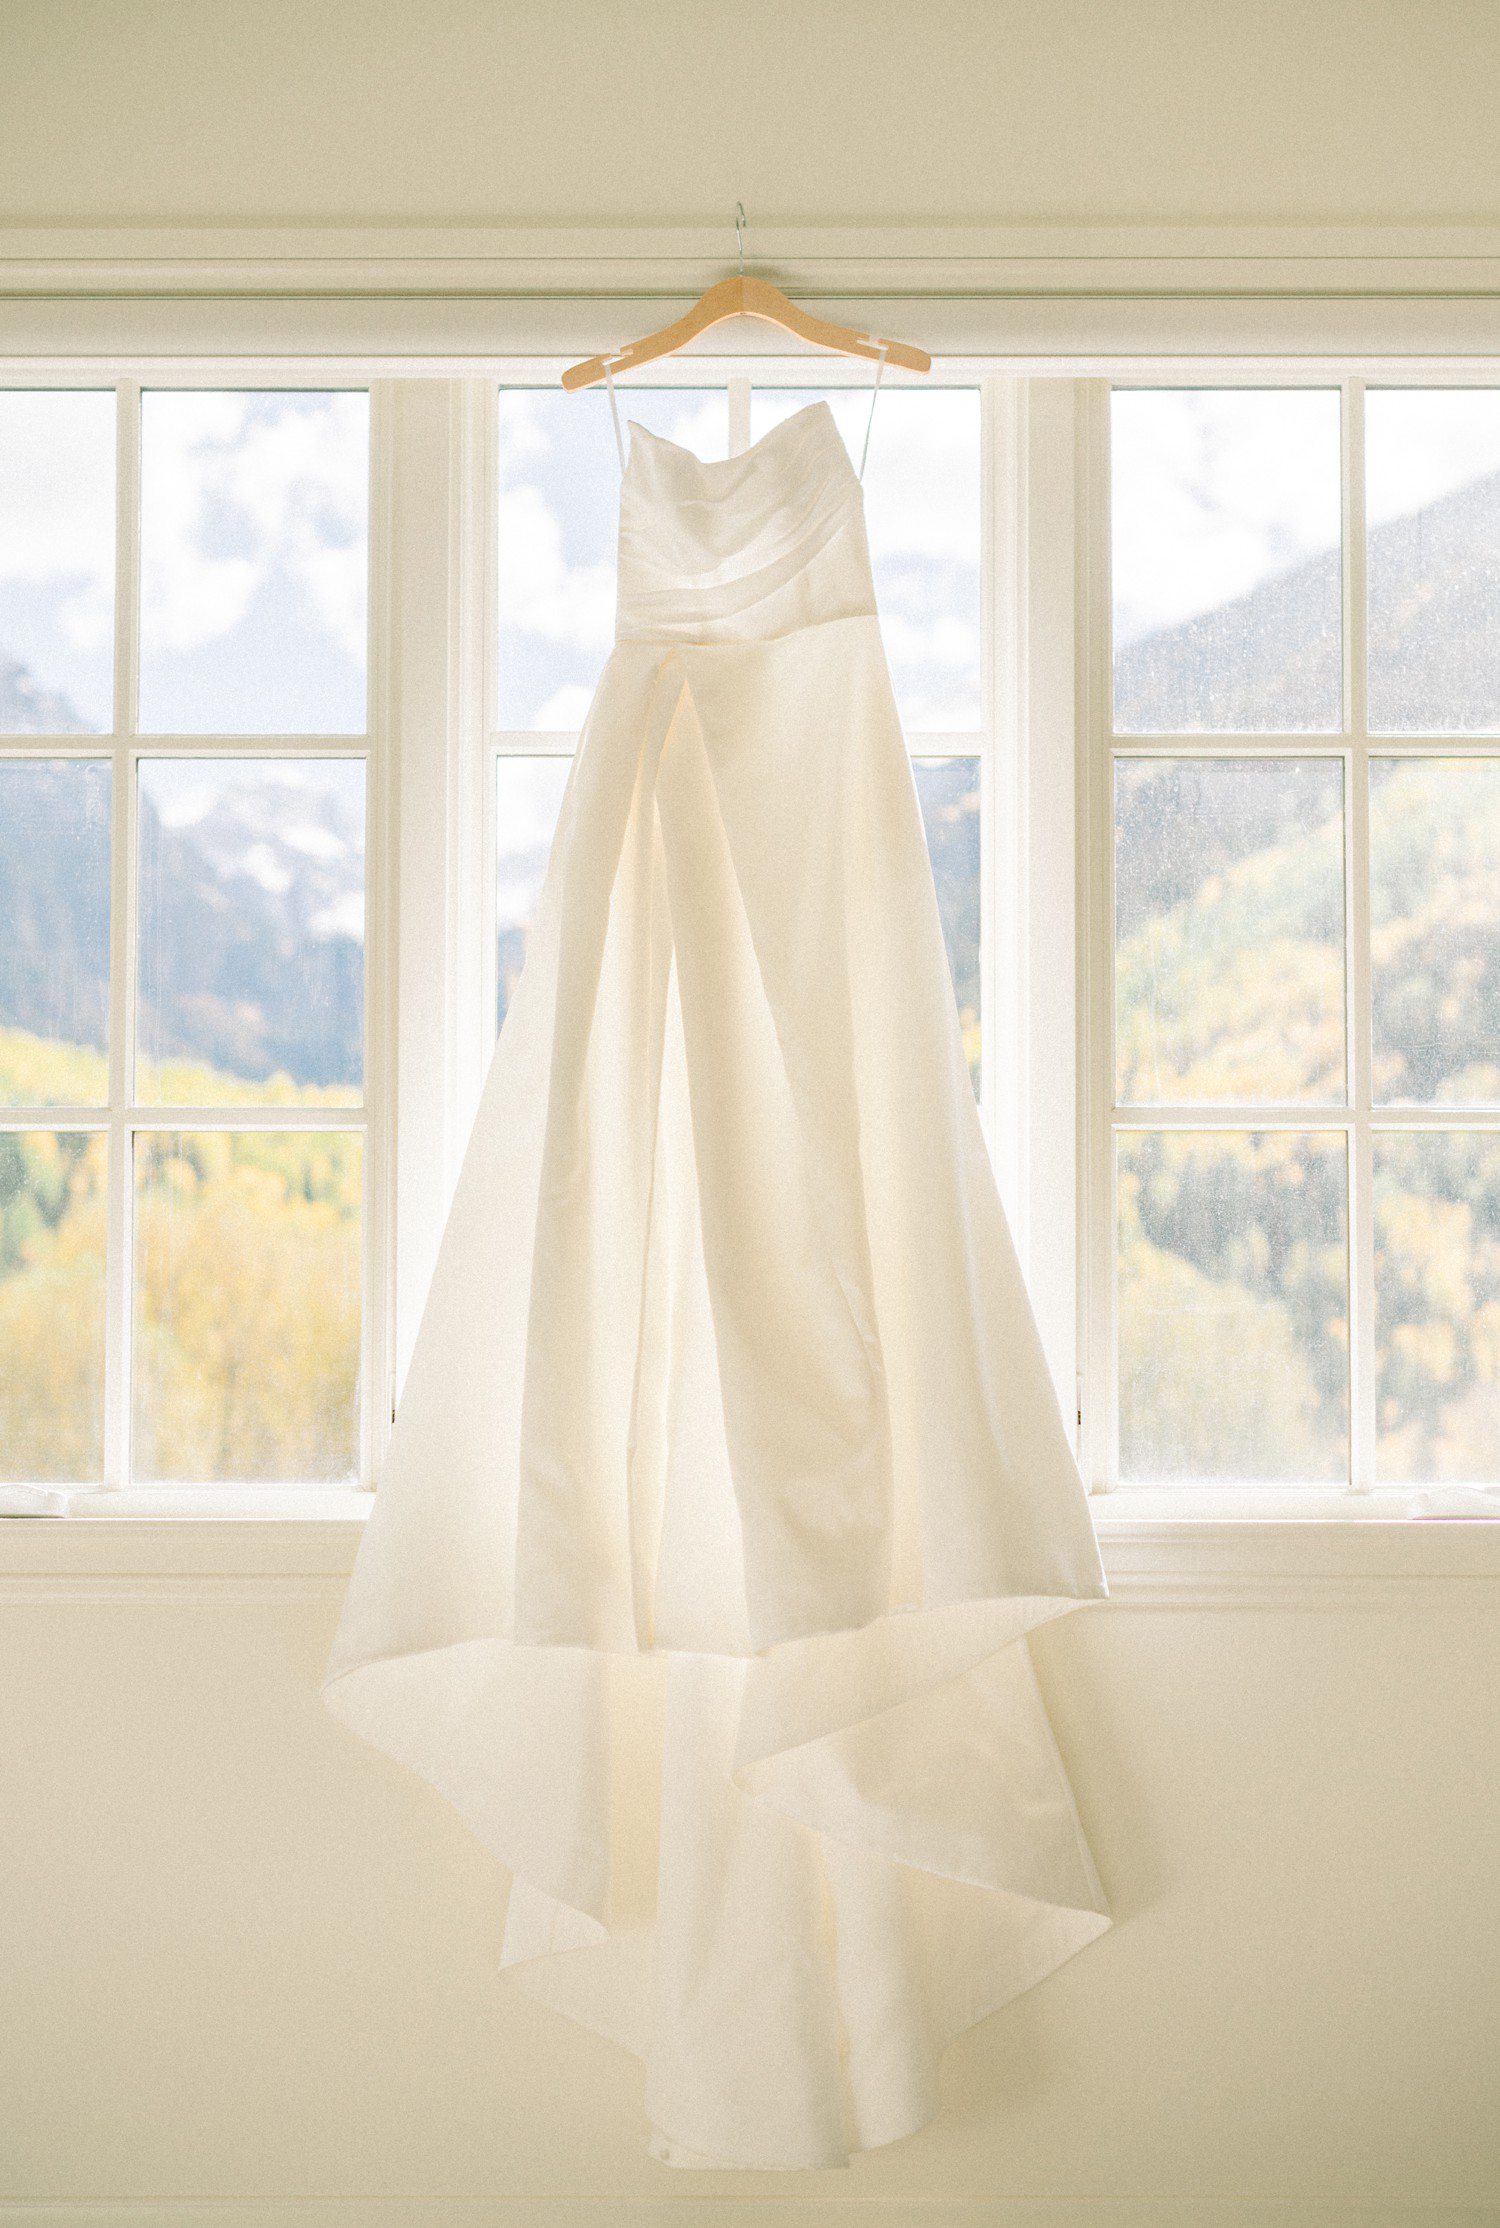 Bride's dress with Telluride in background